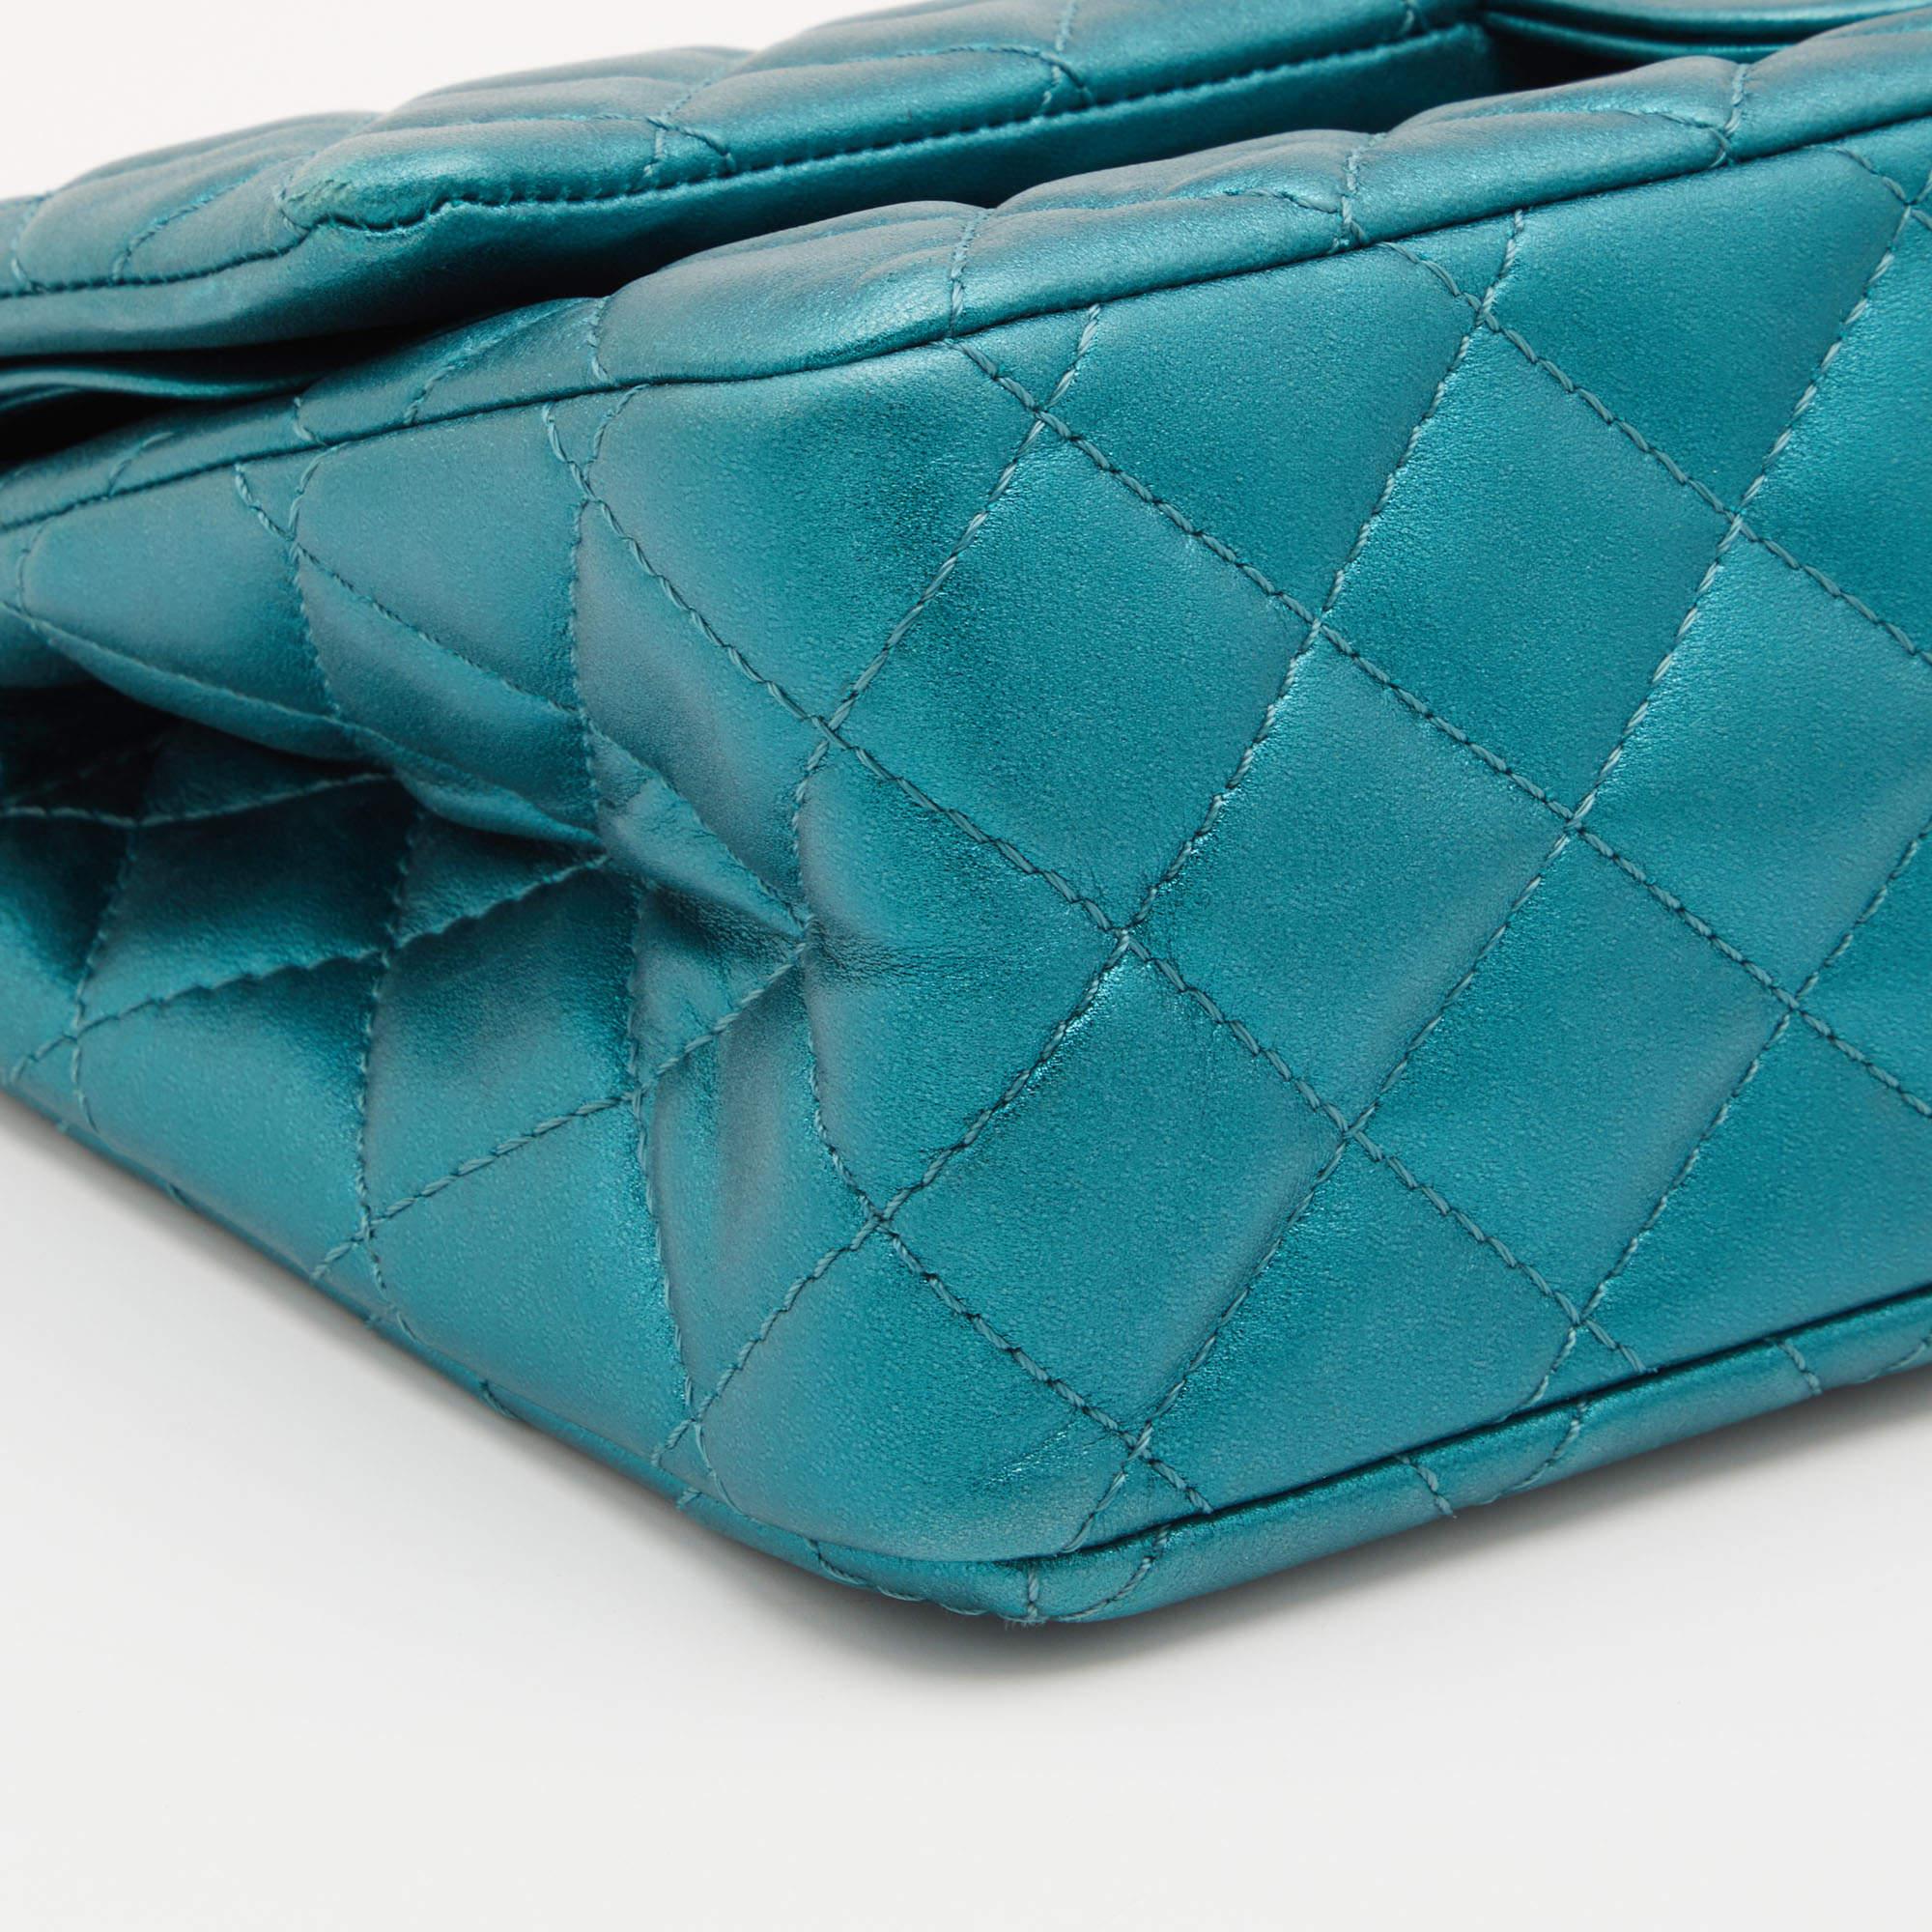 Chanel Metallic Teal Blue Quilted Leather Reissue 2.55 Classic 226 Flap Bag 6